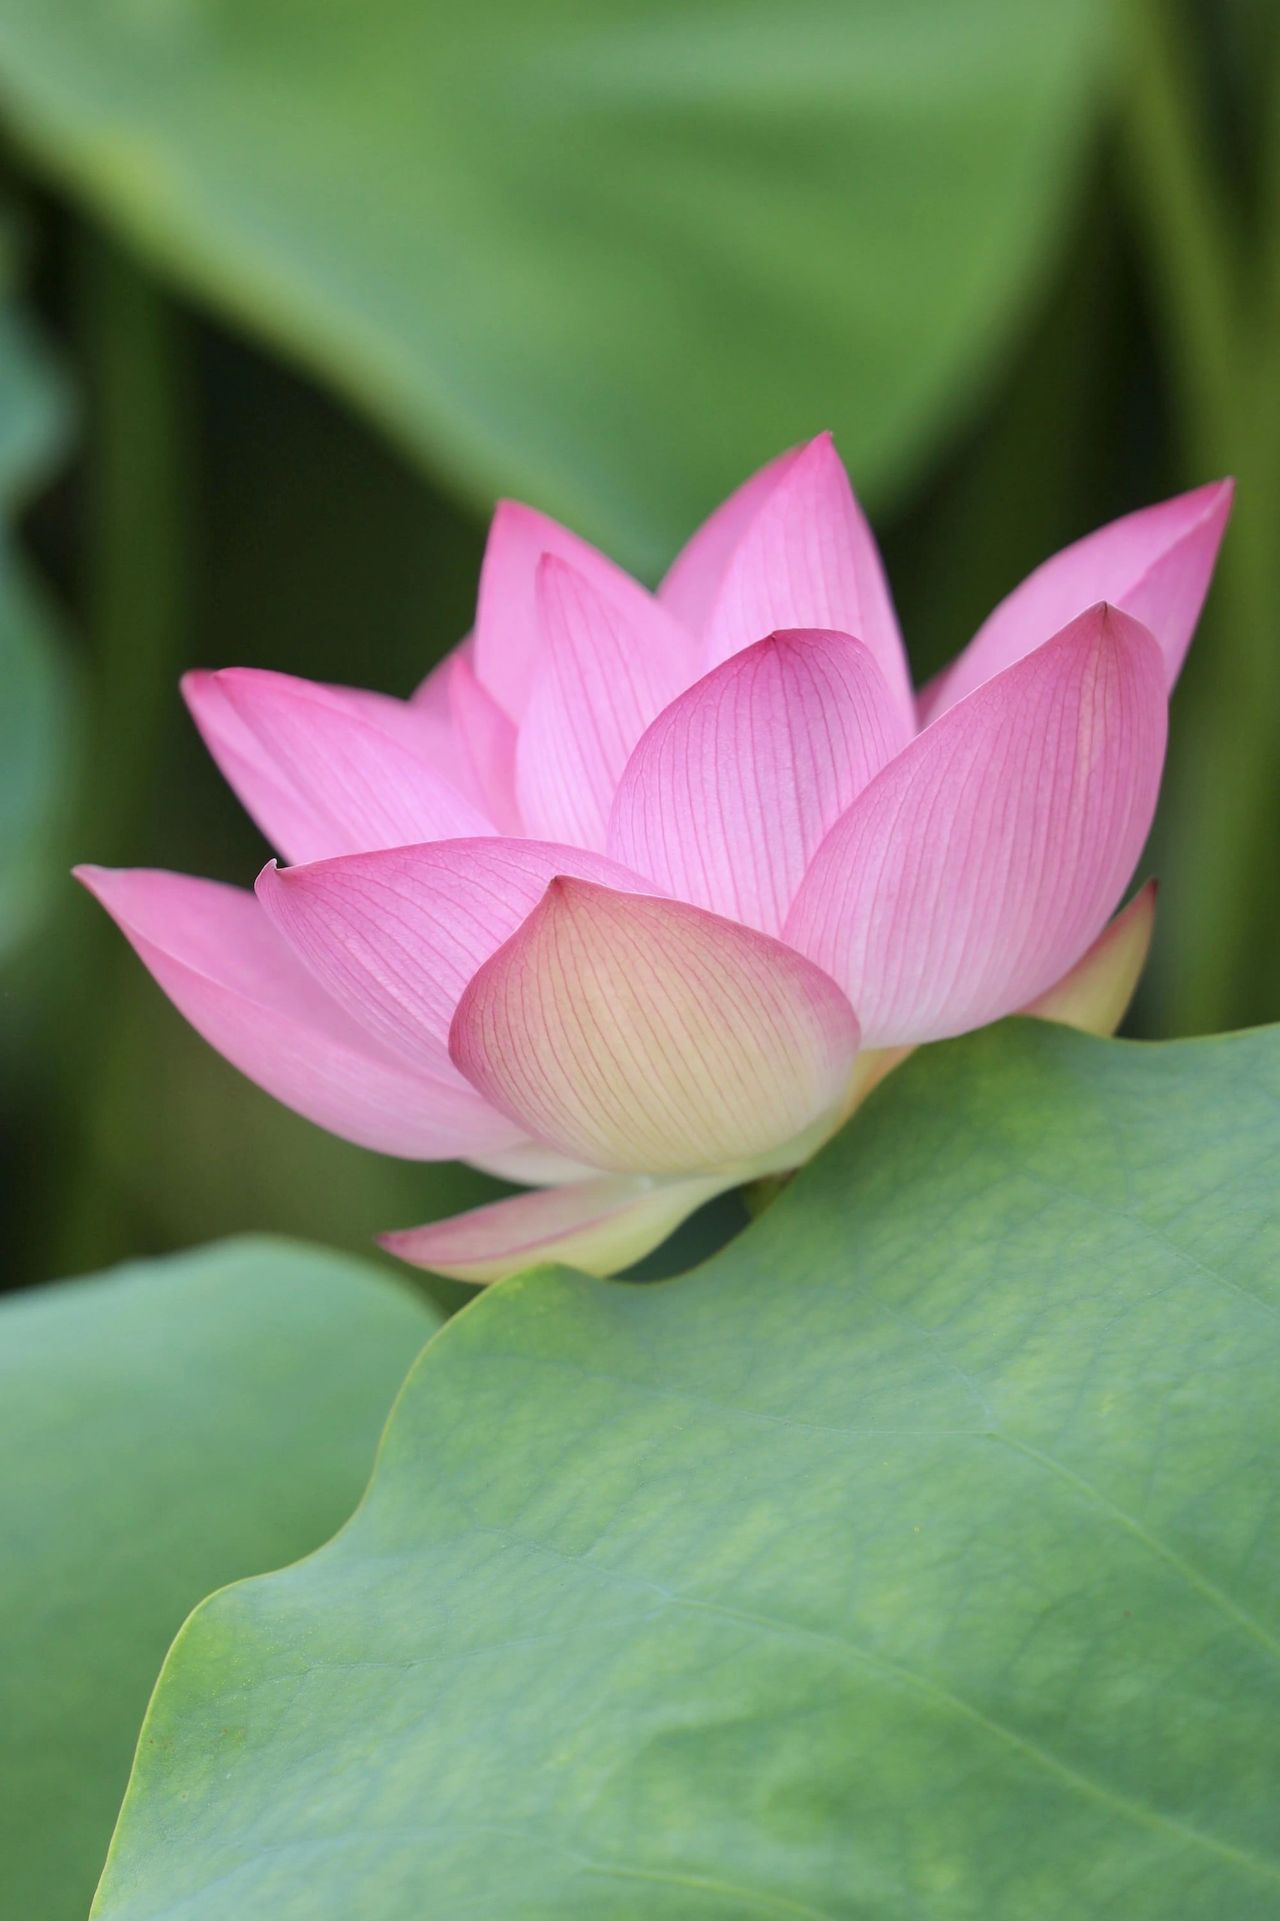 THE LOTUS, LIGHT, POTENTIAL, CO-CREATING